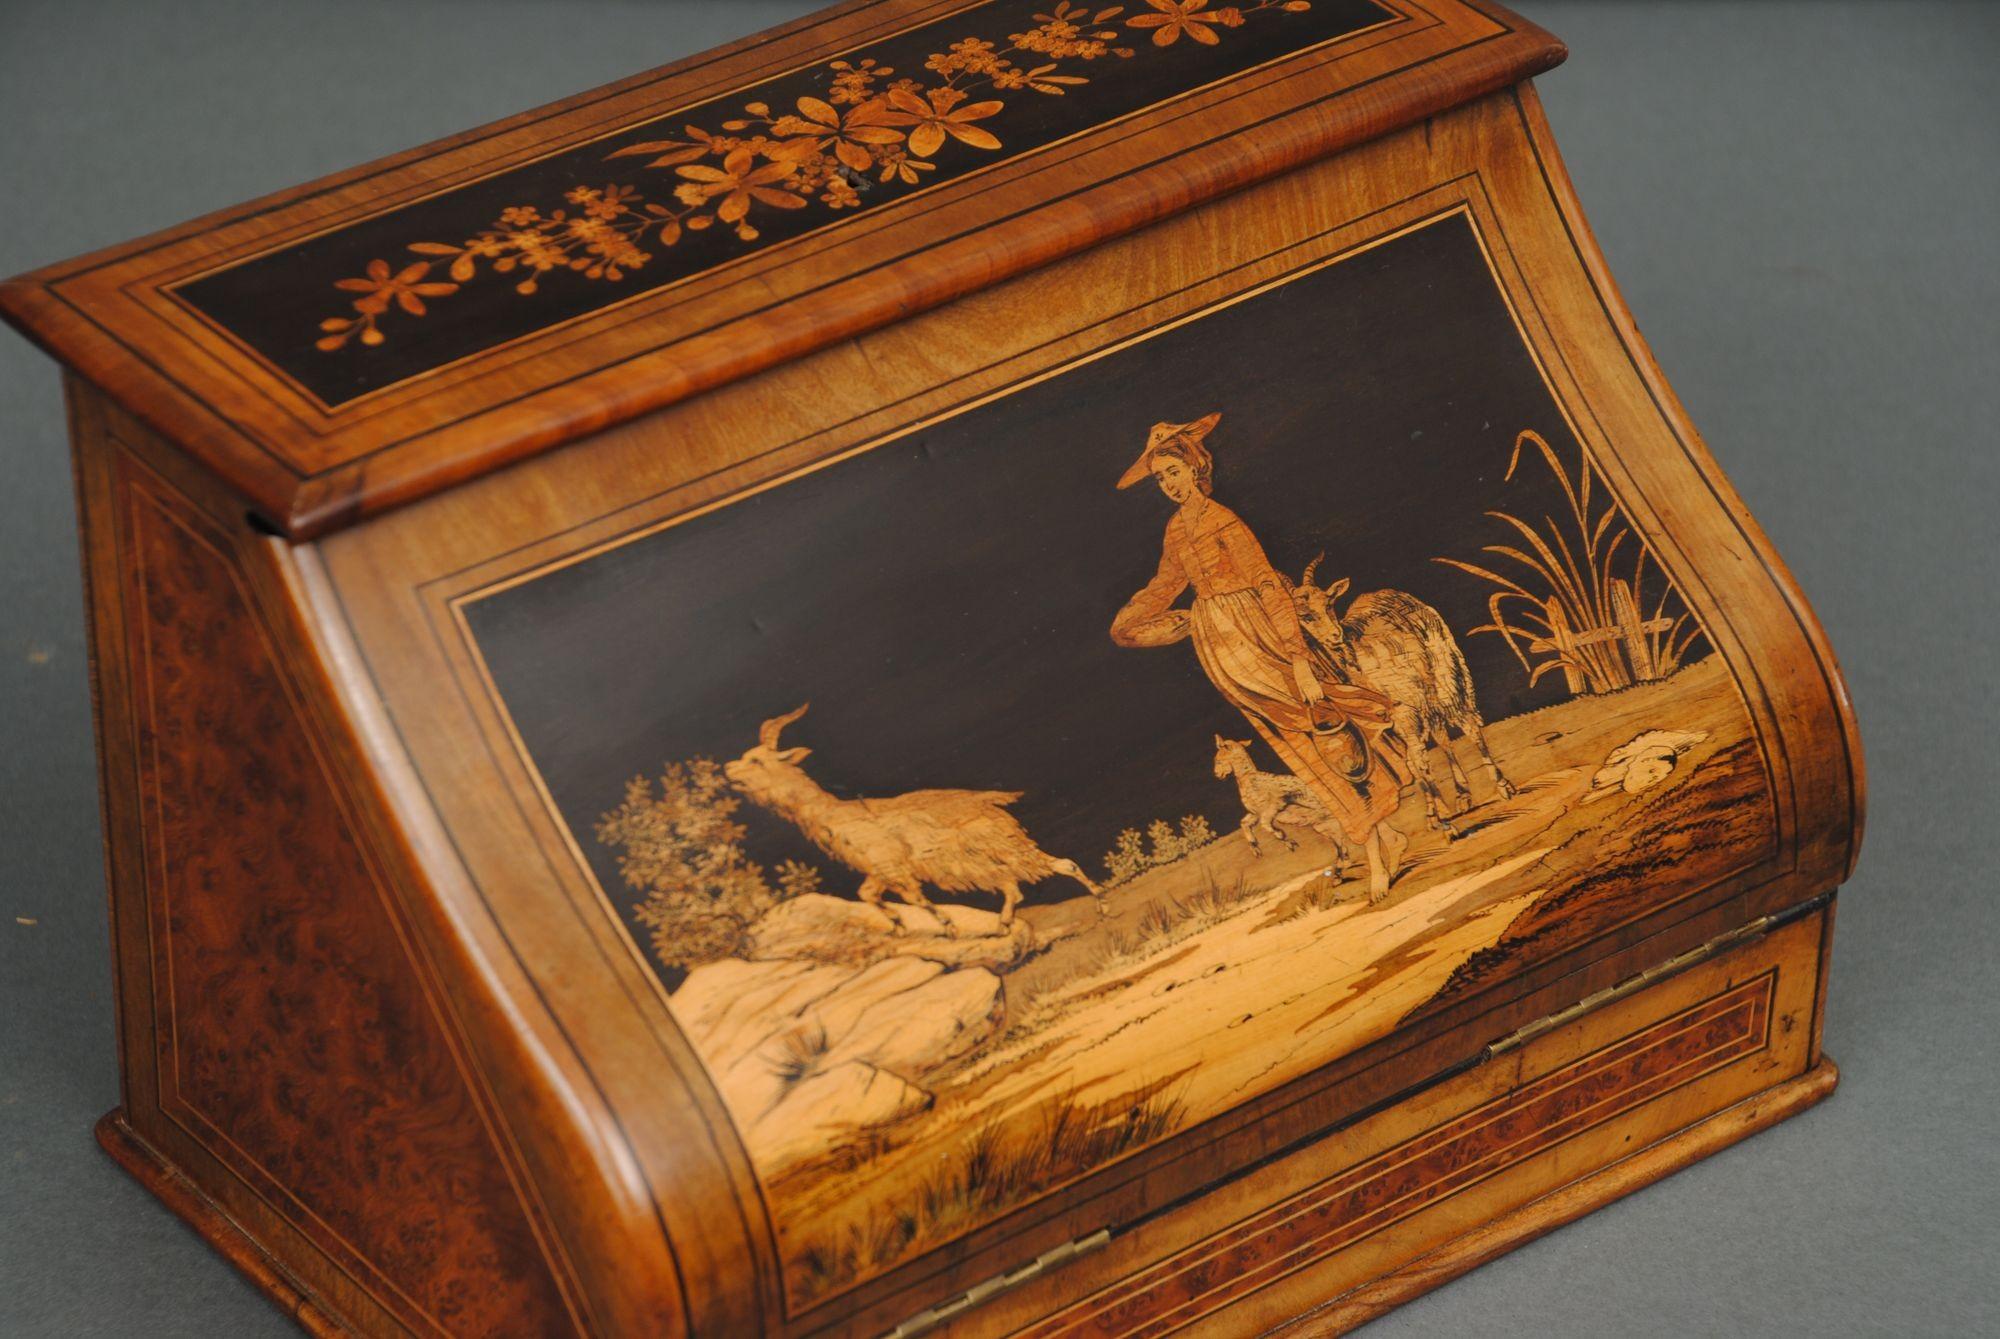 A fine quality marquetry inlaid walnut and olive wood Italian letter or paper box, the shaped top lid with a pastoral scene and shepherdess. 
Circa 1870